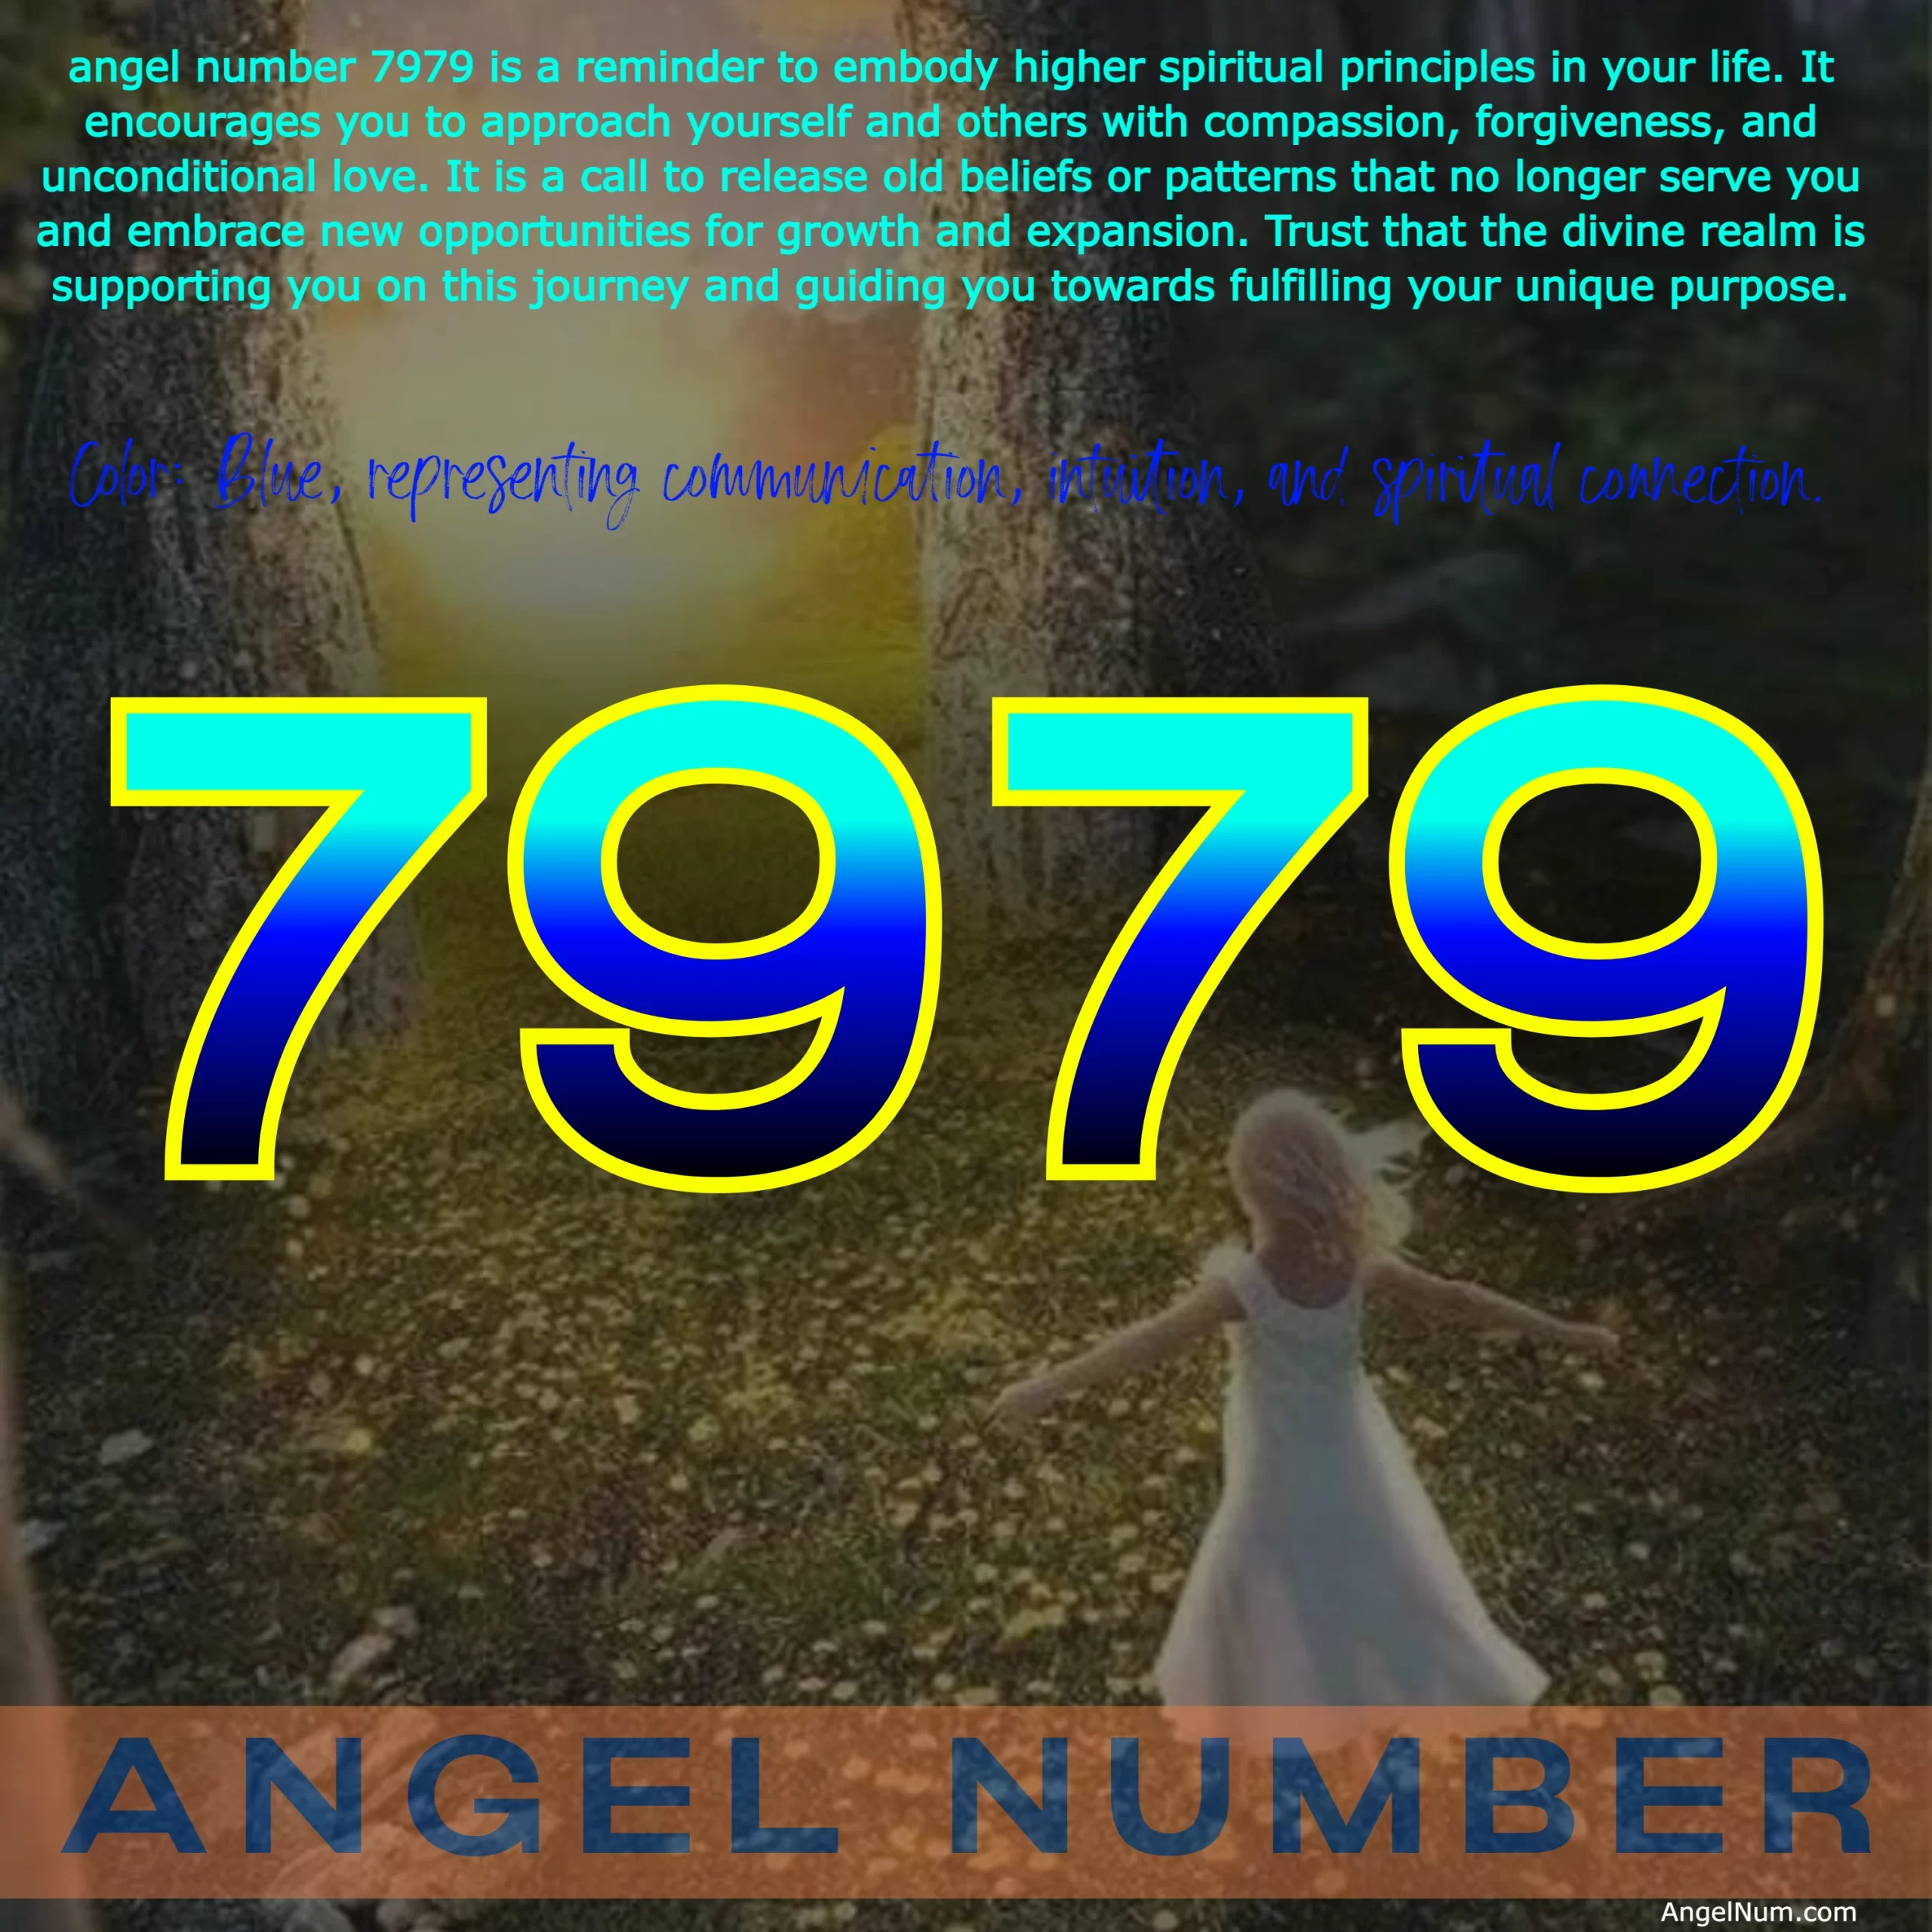 Angel Number 7979: Spiritual Growth, Transformation, and Service to Others